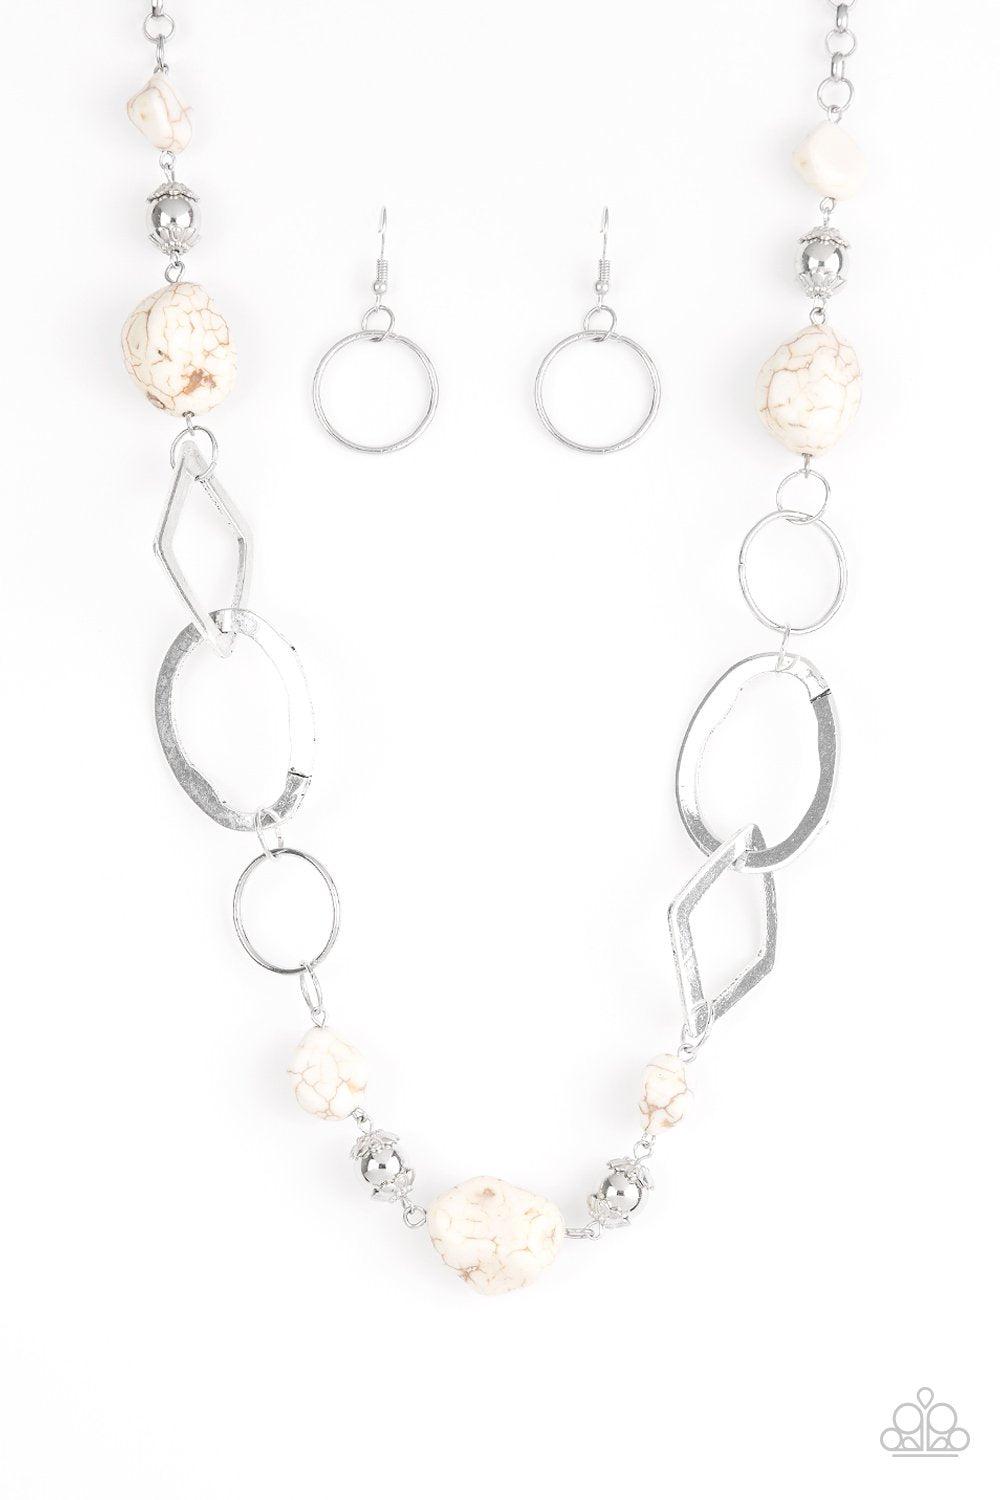 Thats TERRA-ific! White Stone and Silver Necklace - Paparazzi Accessories- lightbox - CarasShop.com - $5 Jewelry by Cara Jewels